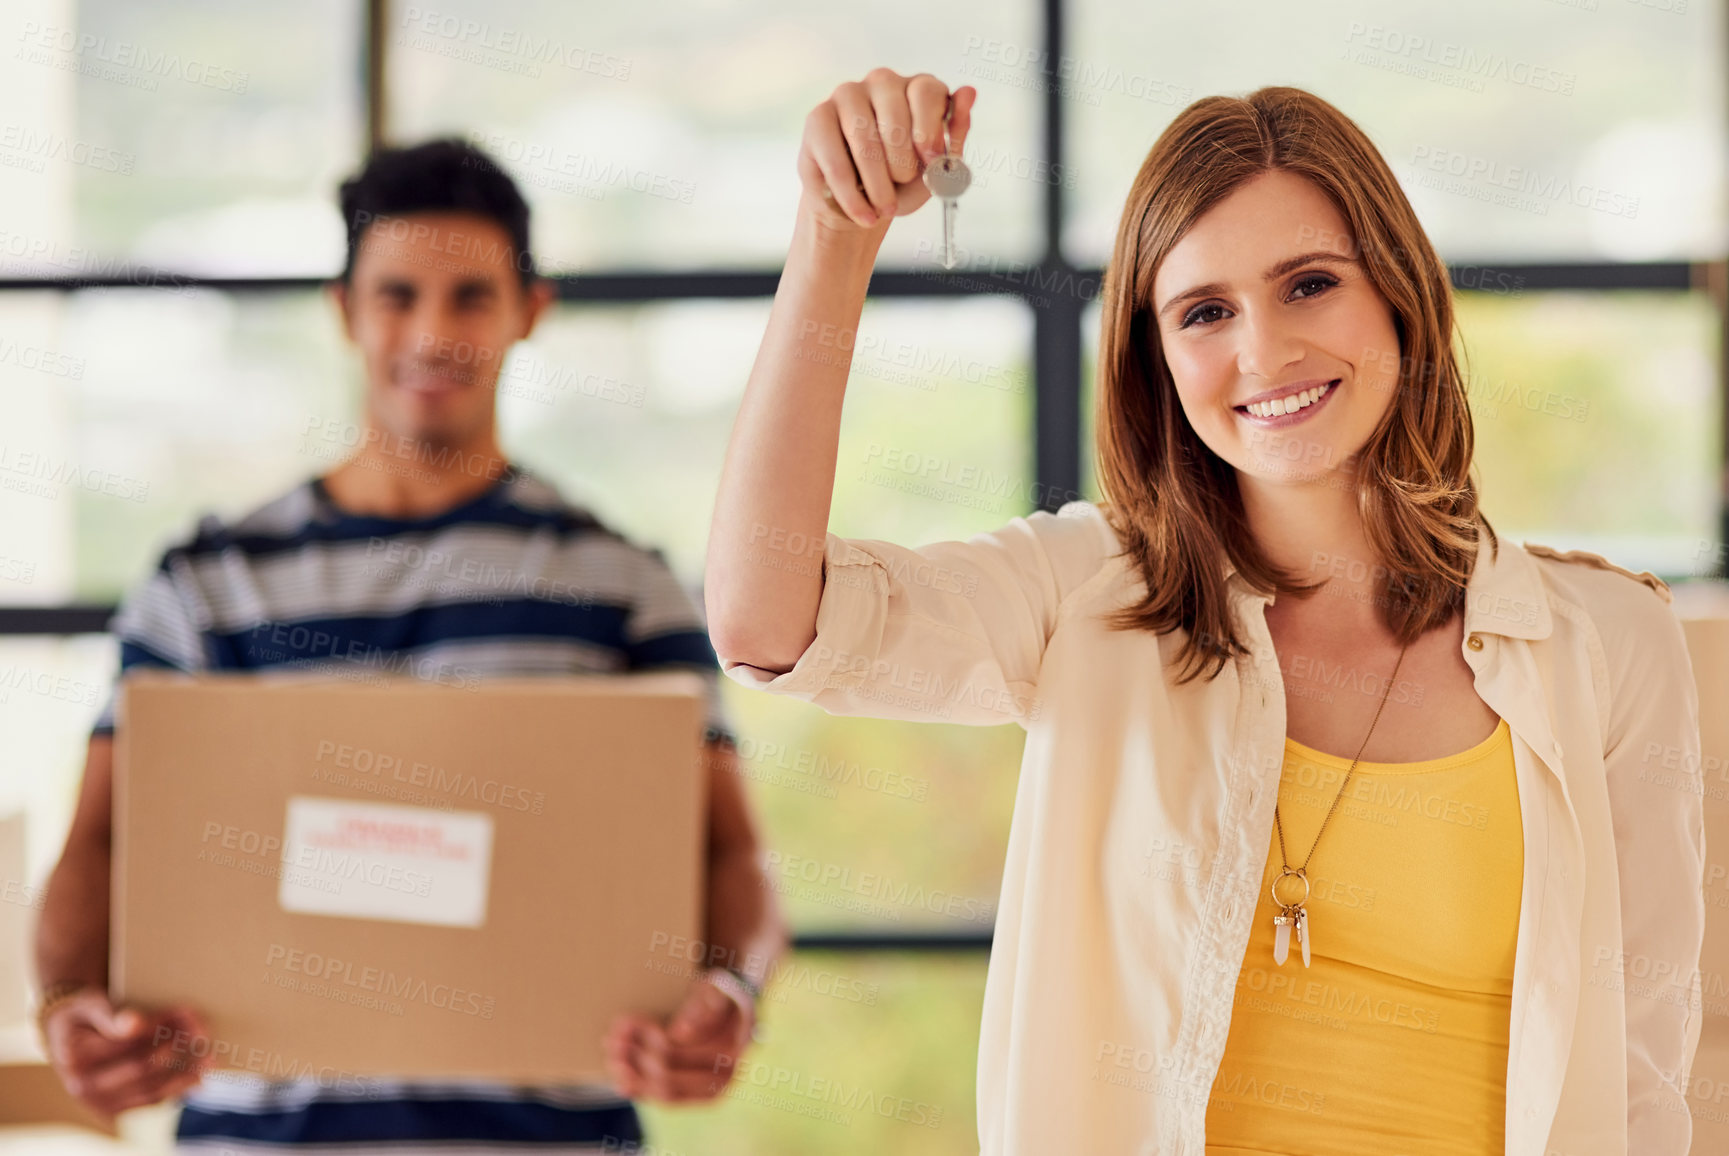 Buy stock photo Portrait of a young woman holding up the keys to a new home with her boyfriend carrying boxes in the background